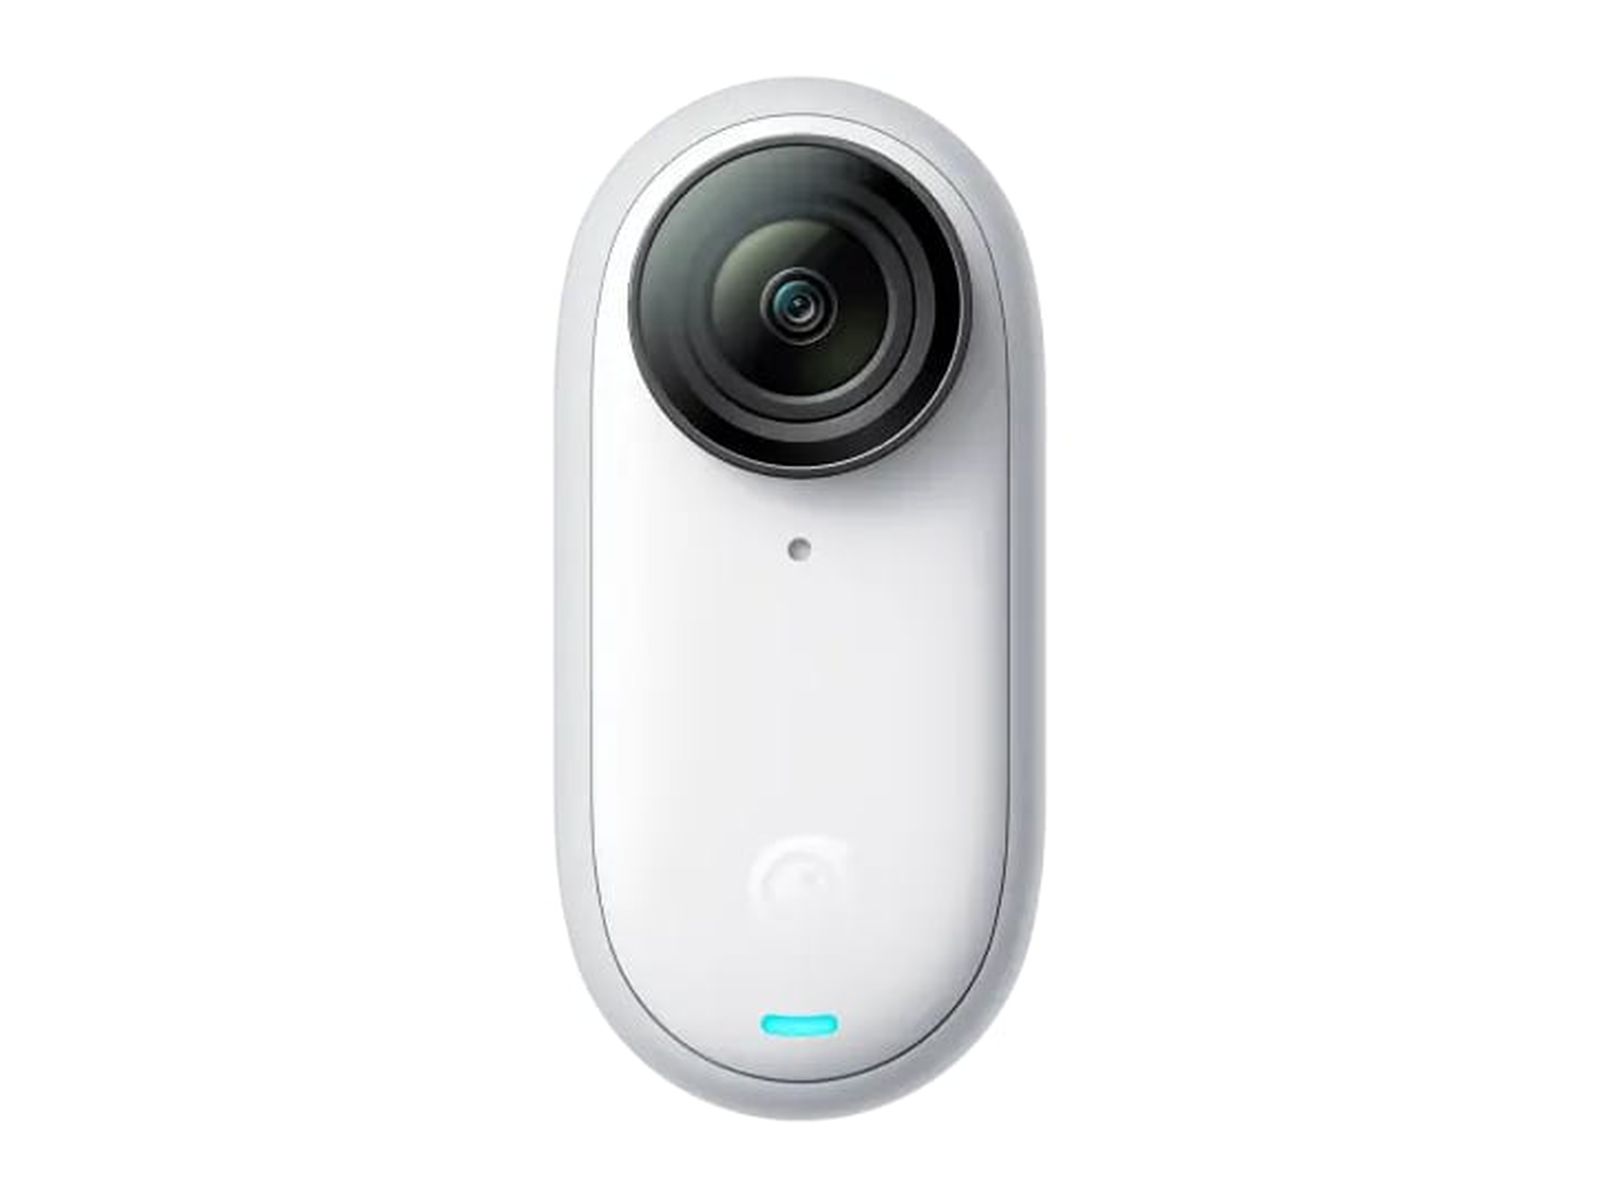 Insta360 Go 3 With Action Pod, Up to 2.7K Video Recording Launched: Details